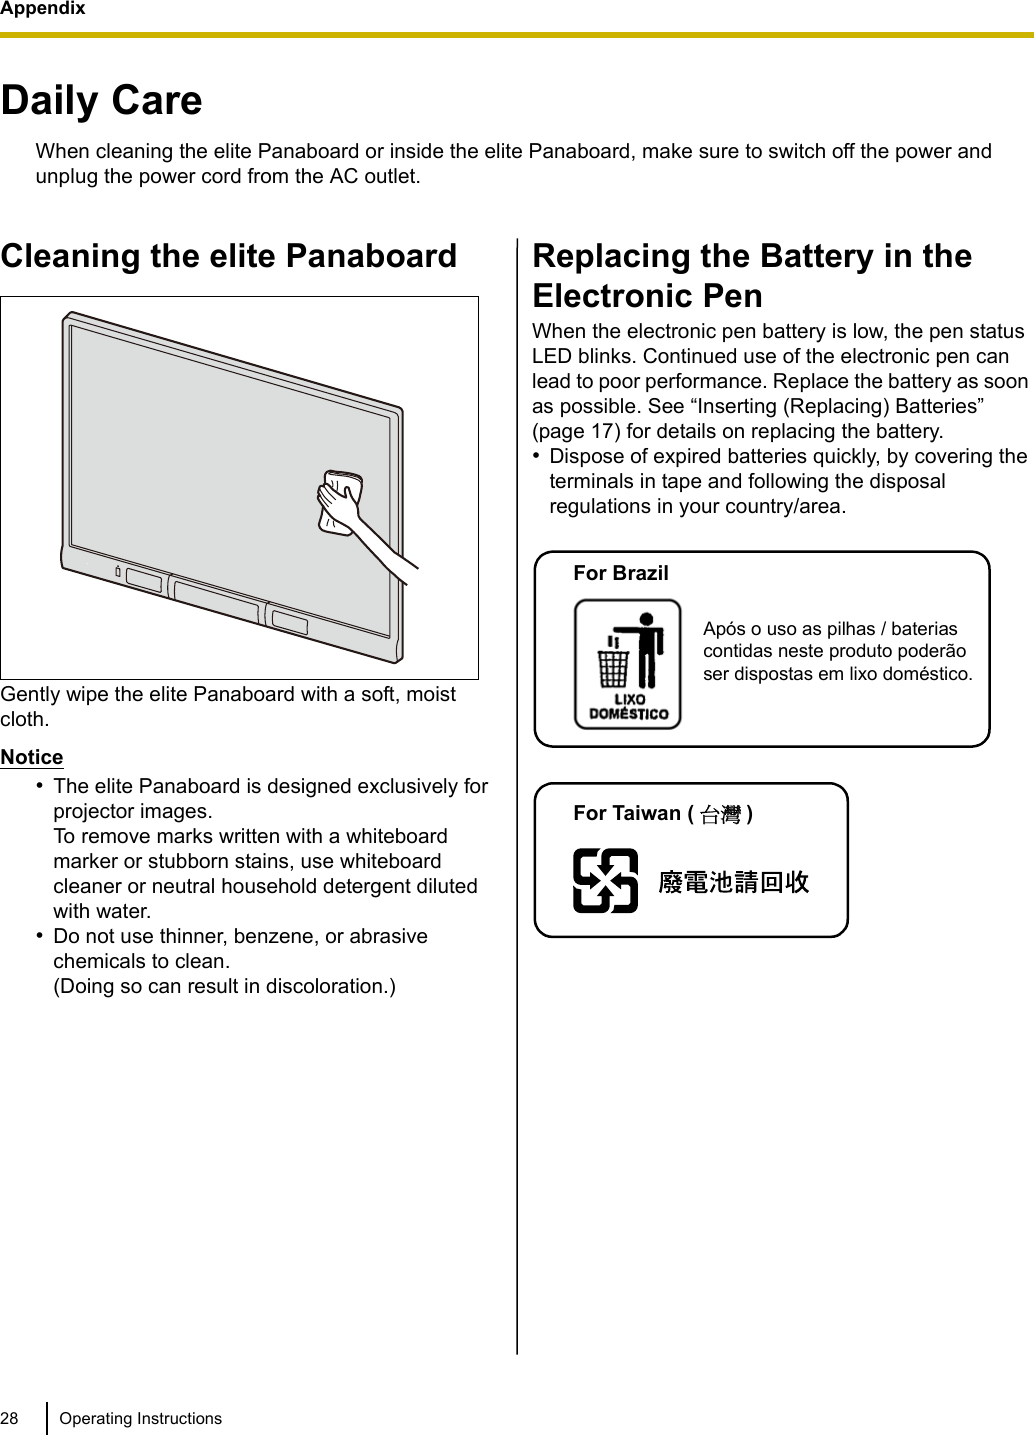 Appendix28 Operating InstructionsAppendixDaily CareWhen cleaning the elite Panaboard or inside the elite Panaboard, make sure to switch off the power and unplug the power cord from the AC outlet.Cleaning the elite PanaboardGently wipe the elite Panaboard with a soft, moist cloth.Notice•The elite Panaboard is designed exclusively for projector images. To remove marks written with a whiteboard marker or stubborn stains, use whiteboard cleaner or neutral household detergent diluted with water.•Do not use thinner, benzene, or abrasive chemicals to clean. (Doing so can result in discoloration.)Replacing the Battery in the Electronic PenWhen the electronic pen battery is low, the pen status LED blinks. Continued use of the electronic pen can lead to poor performance. Replace the battery as soon as possible. See “Inserting (Replacing) Batteries” (page 17) for details on replacing the battery.•Dispose of expired batteries quickly, by covering the terminals in tape and following the disposal regulations in your country/area.Após o uso as pilhas / baterias contidas neste produto poderão ser dispostas em lixo doméstico.For BrazilFor Taiwan ( ؀᨜ )